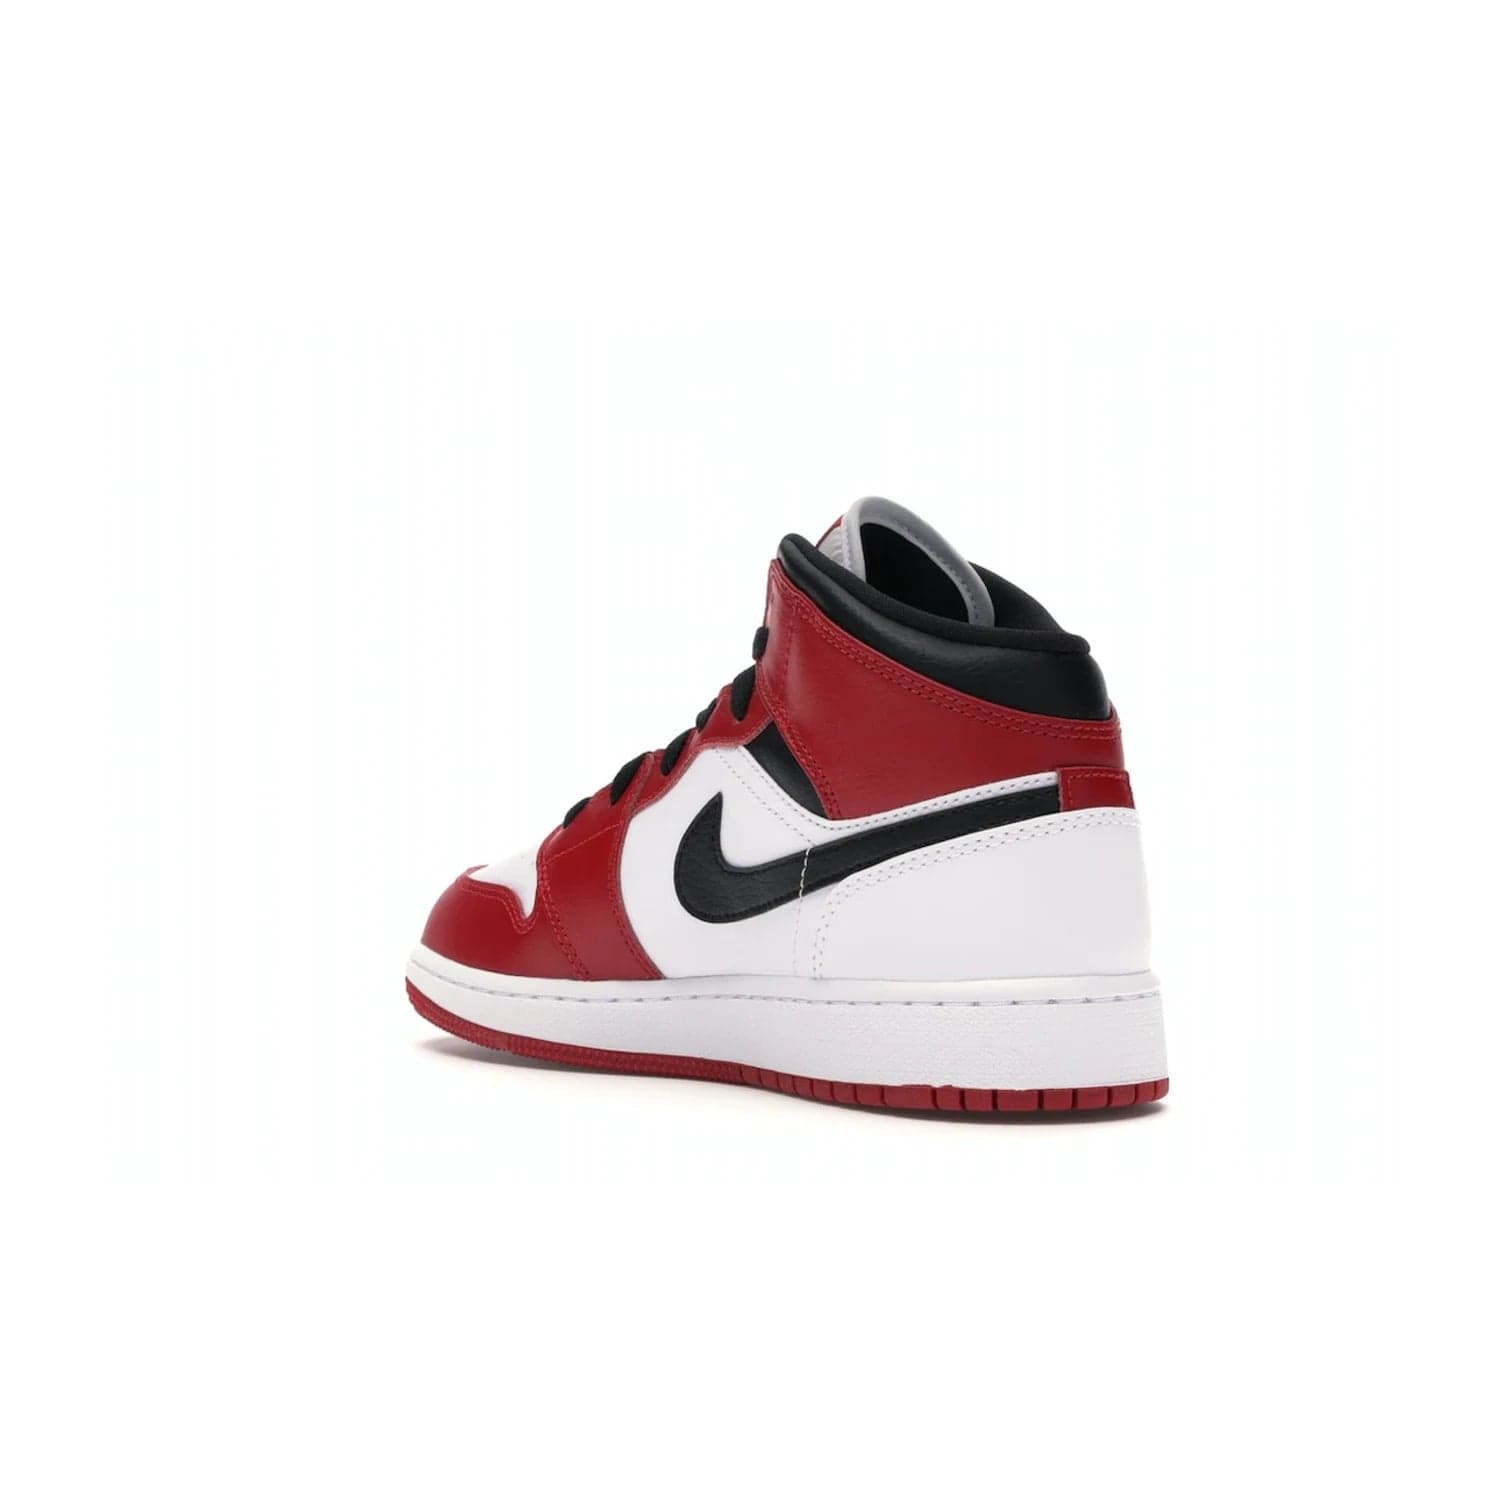 Jordan 1 Mid Chicago (2020) (GS) - Image 24 - Only at www.BallersClubKickz.com - The Kids Air Jordan 1 Mid Chicago 2020 is a stylish sneaker with classic Jordan features. White, red and black color scheme with iconic Wings and Swoosh logos, padded ankle support, white midsole with Air tech and black cotton laces. Sure to become an instant classic. July 2020 release.